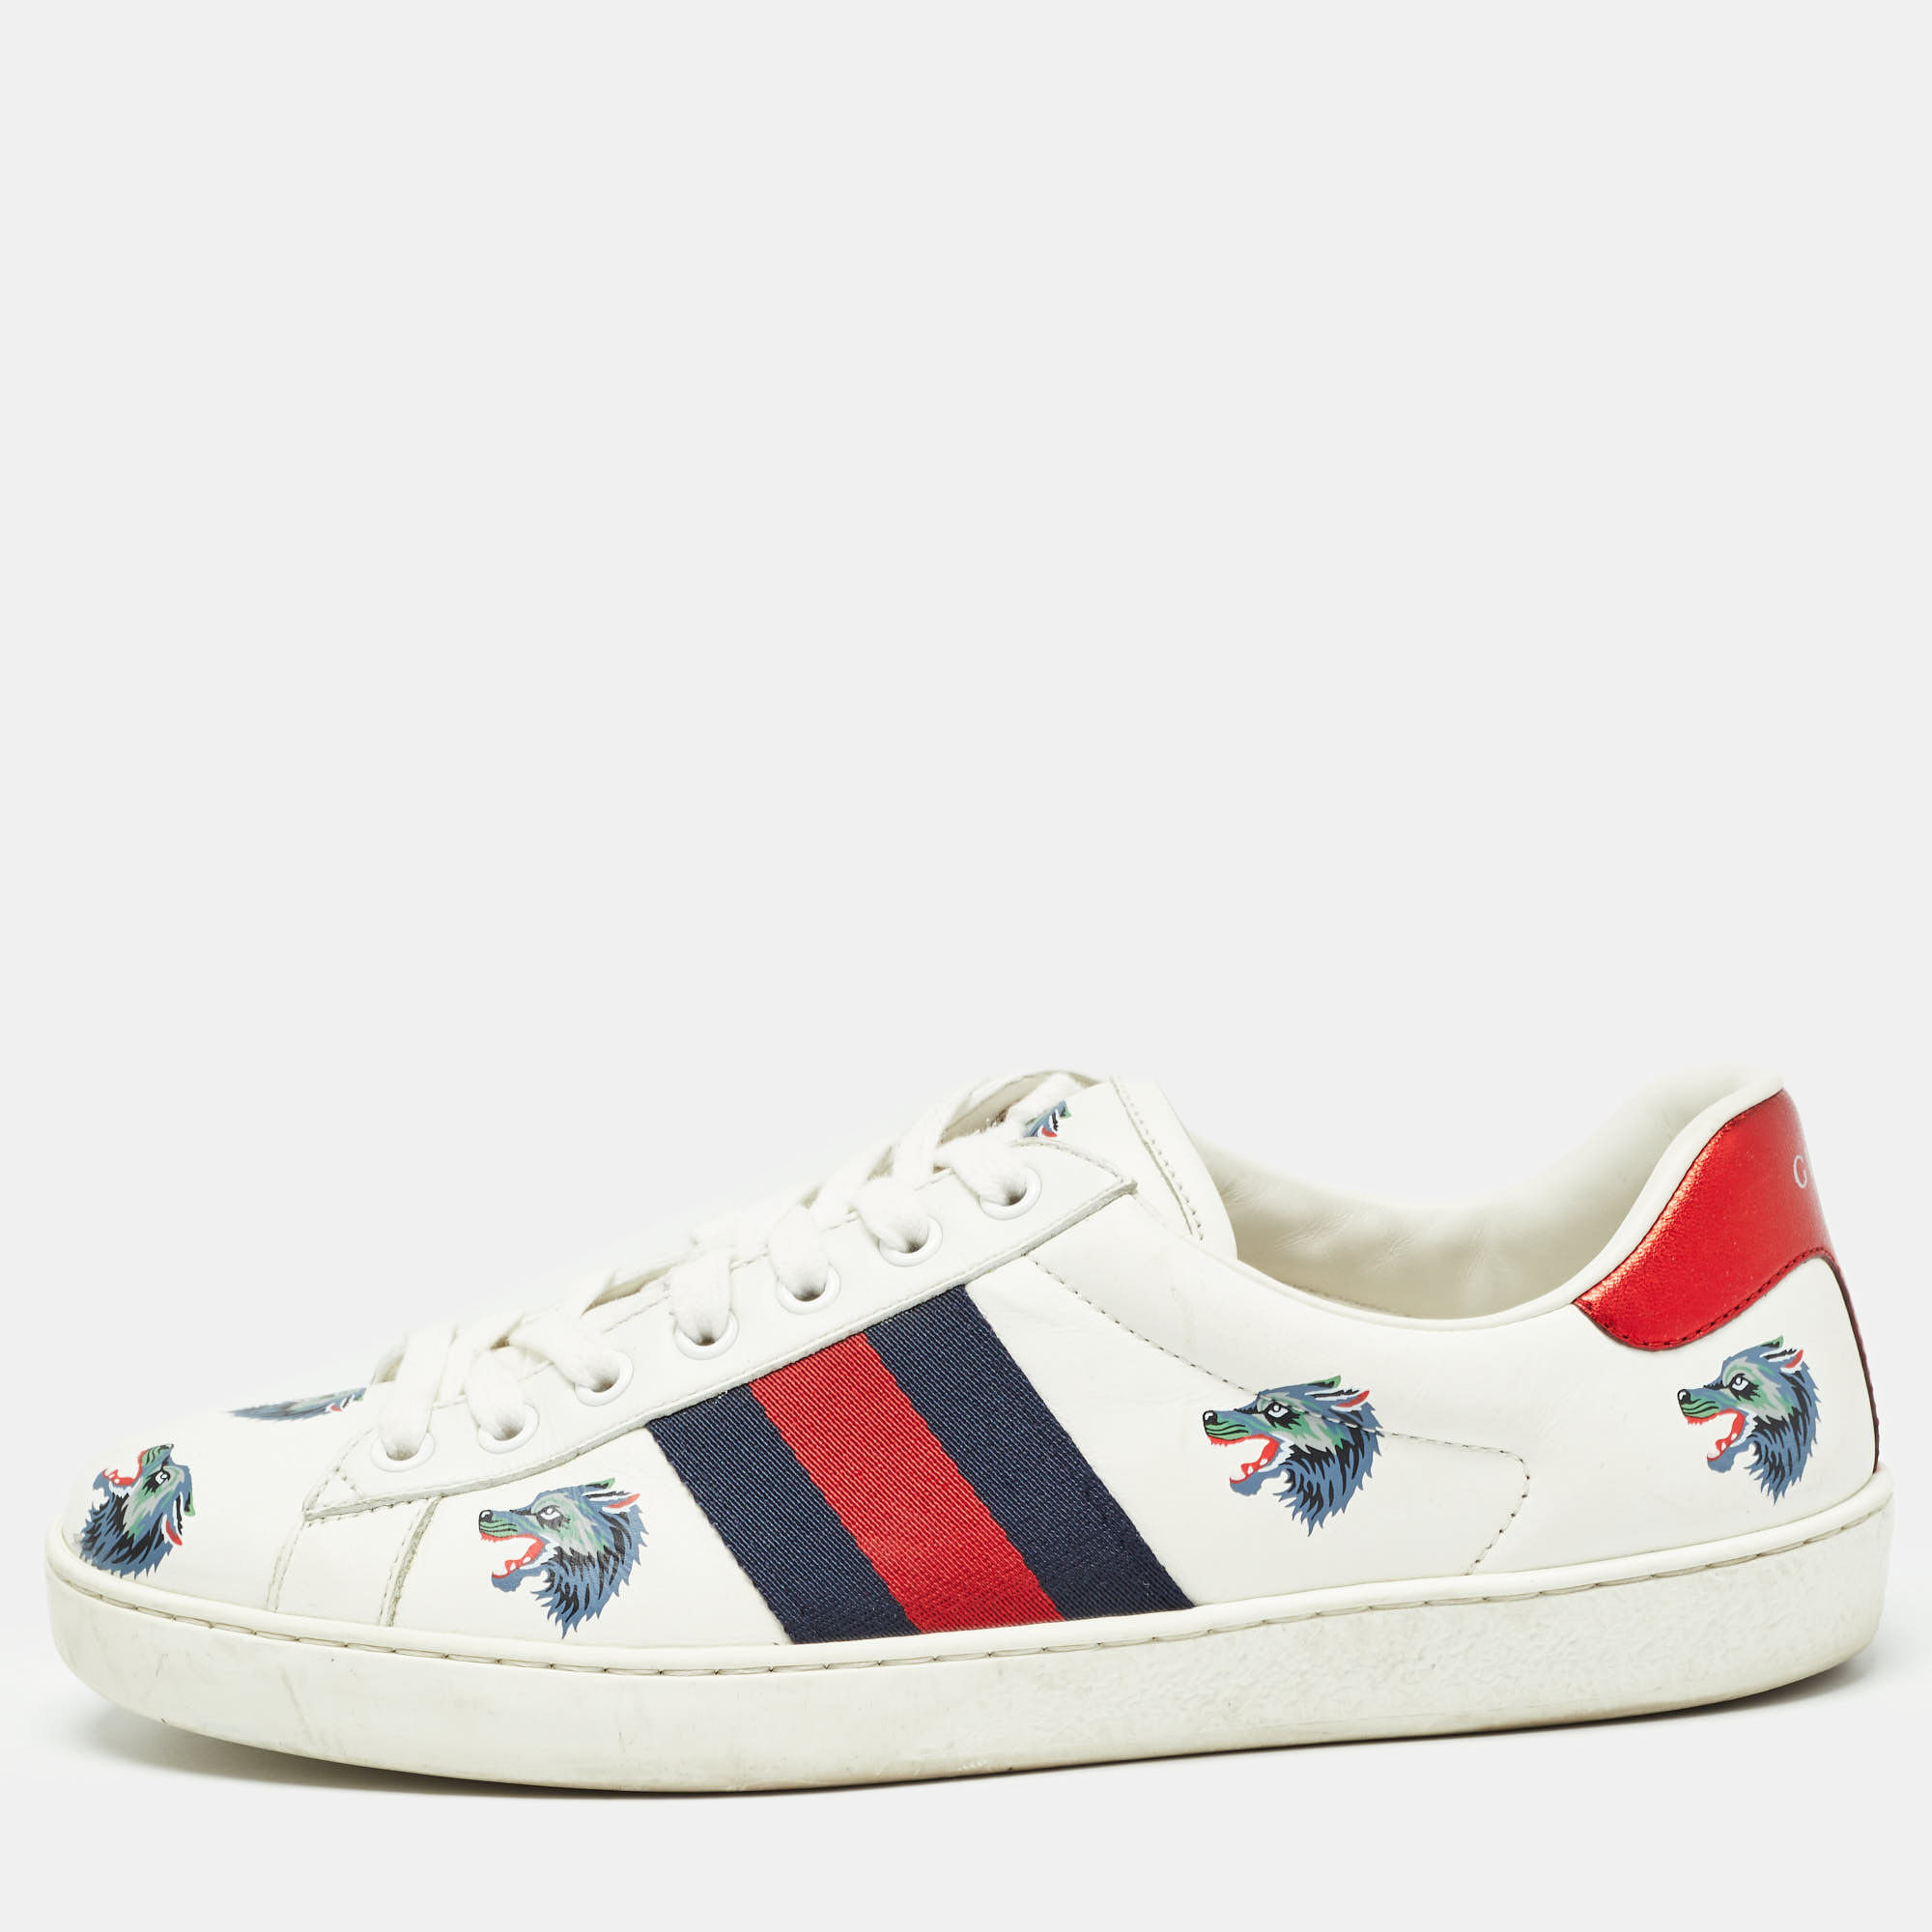 Pre-owned Gucci White Leather Wolf Print Ace Sneakers Size 41.5